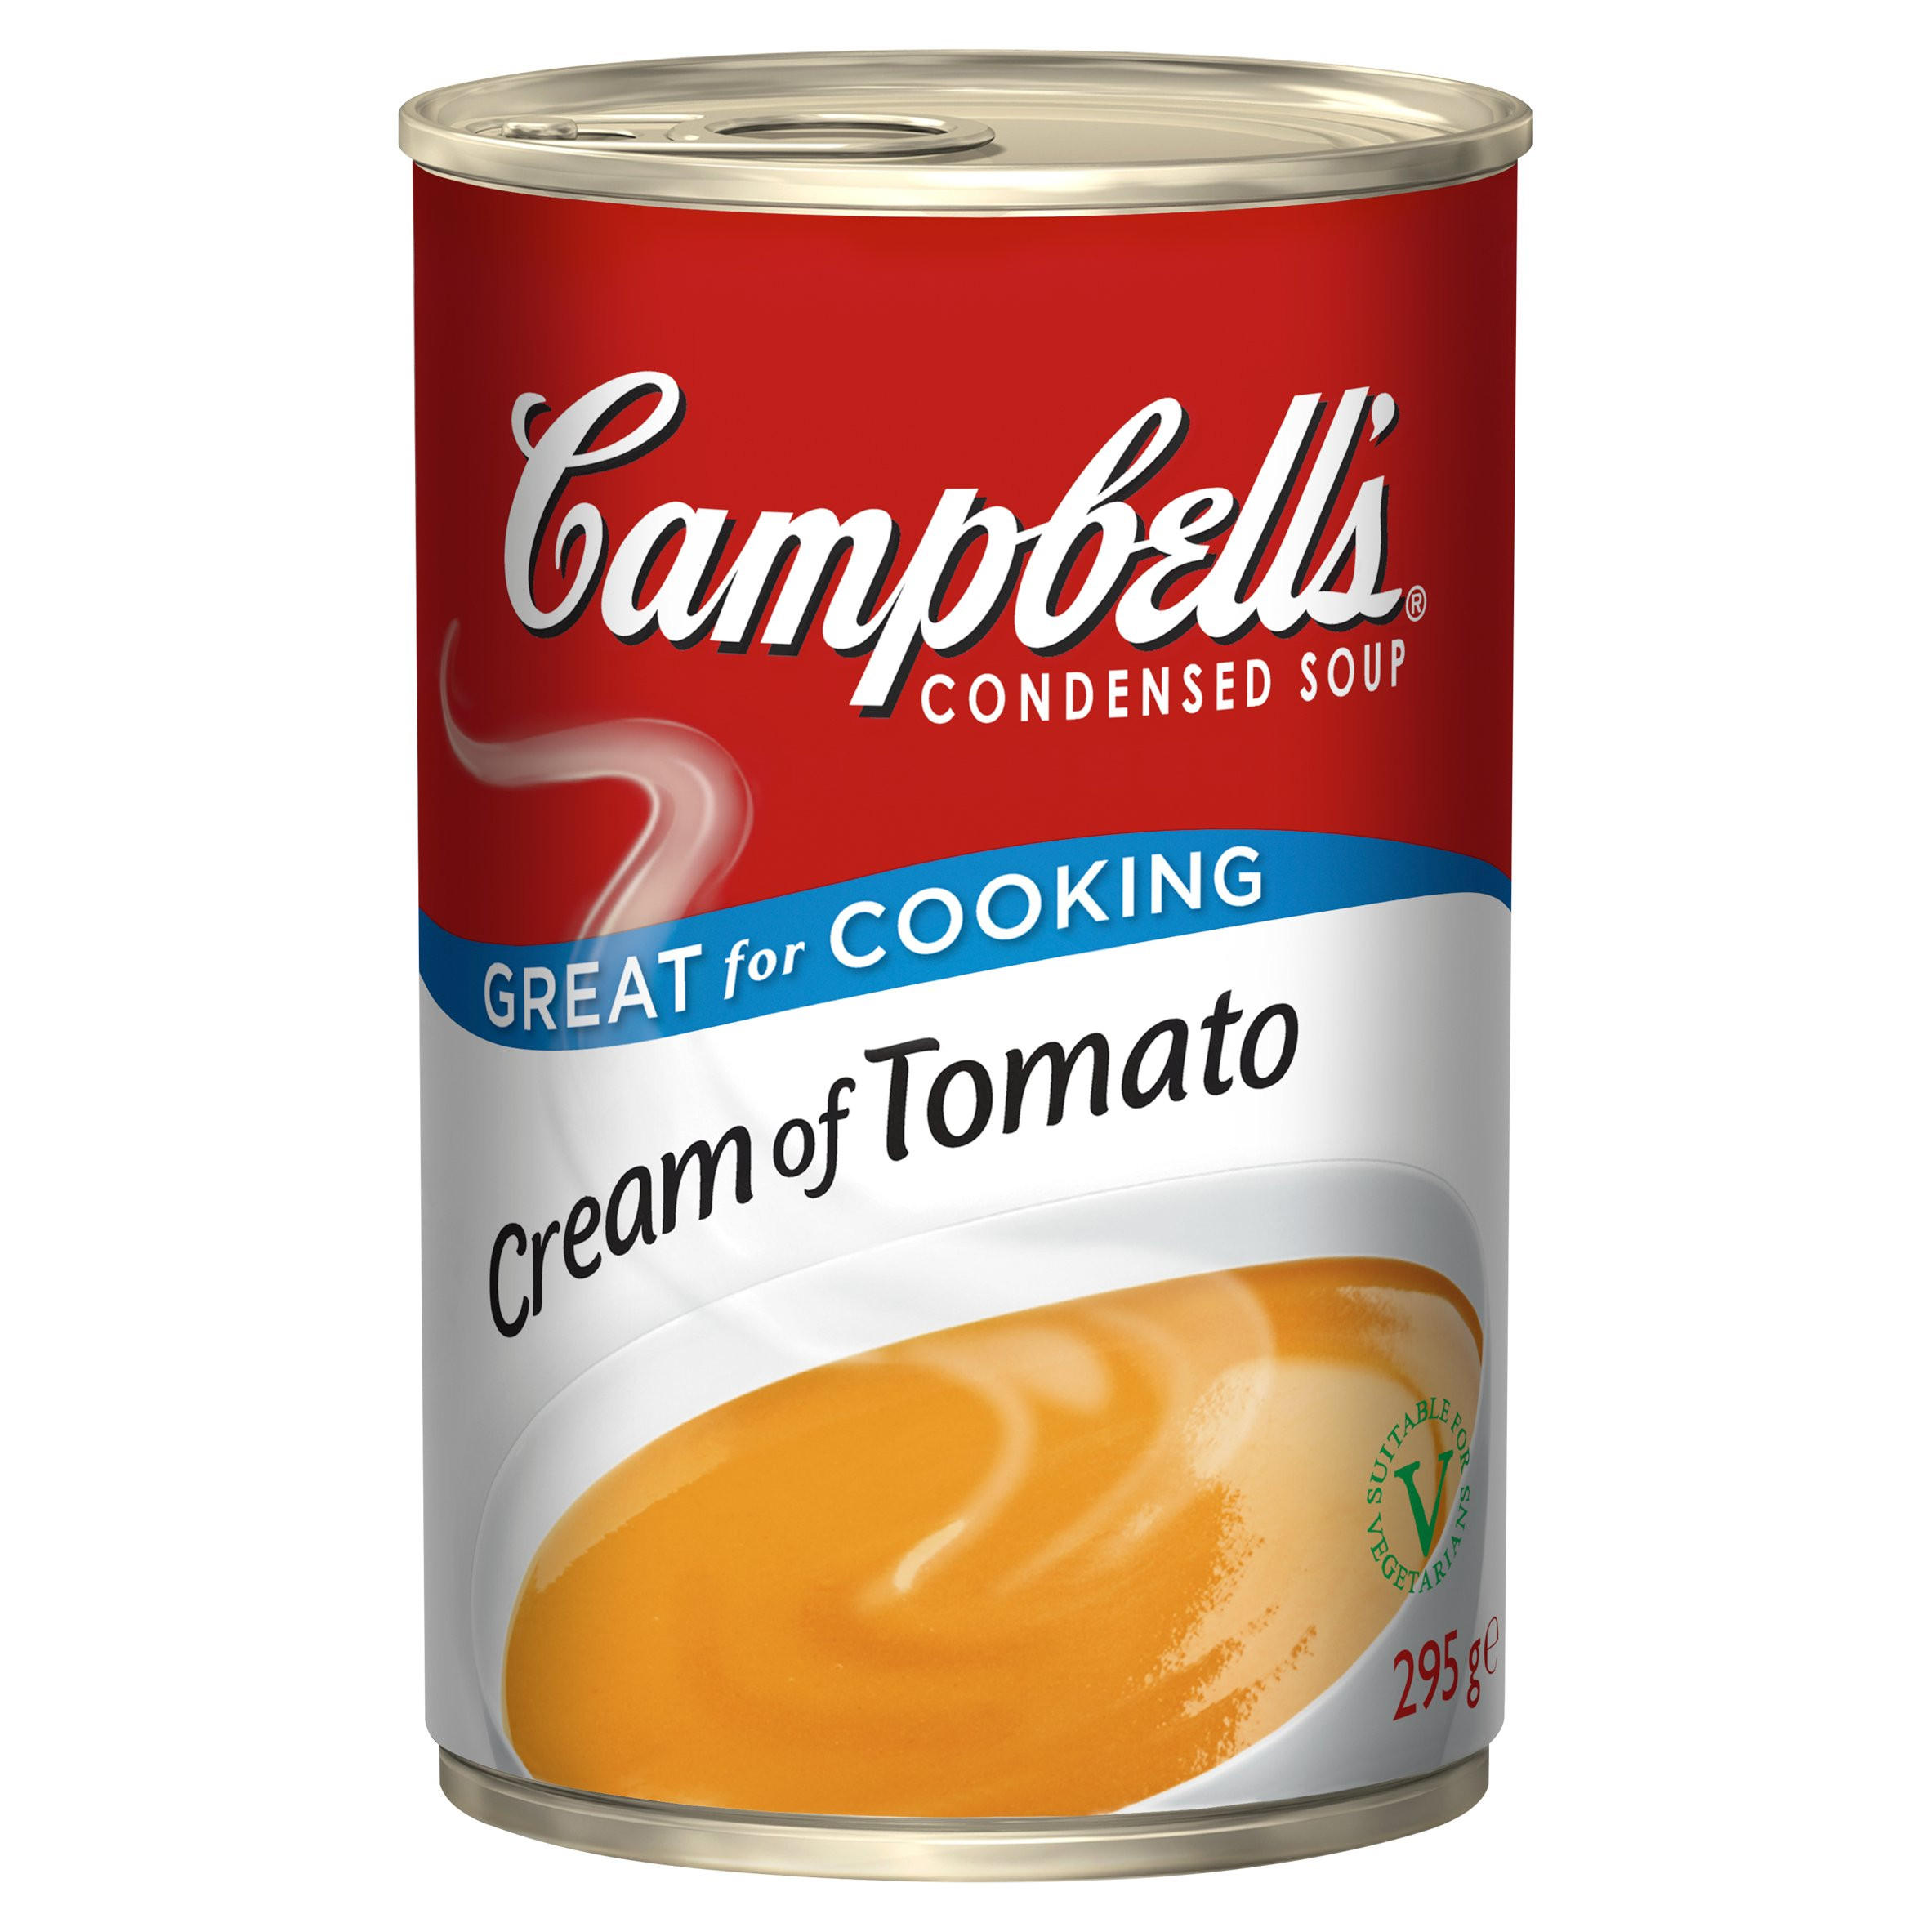 Campbells Condensed Soup Cream Of Tomato 295g Tinned Soup Iceland